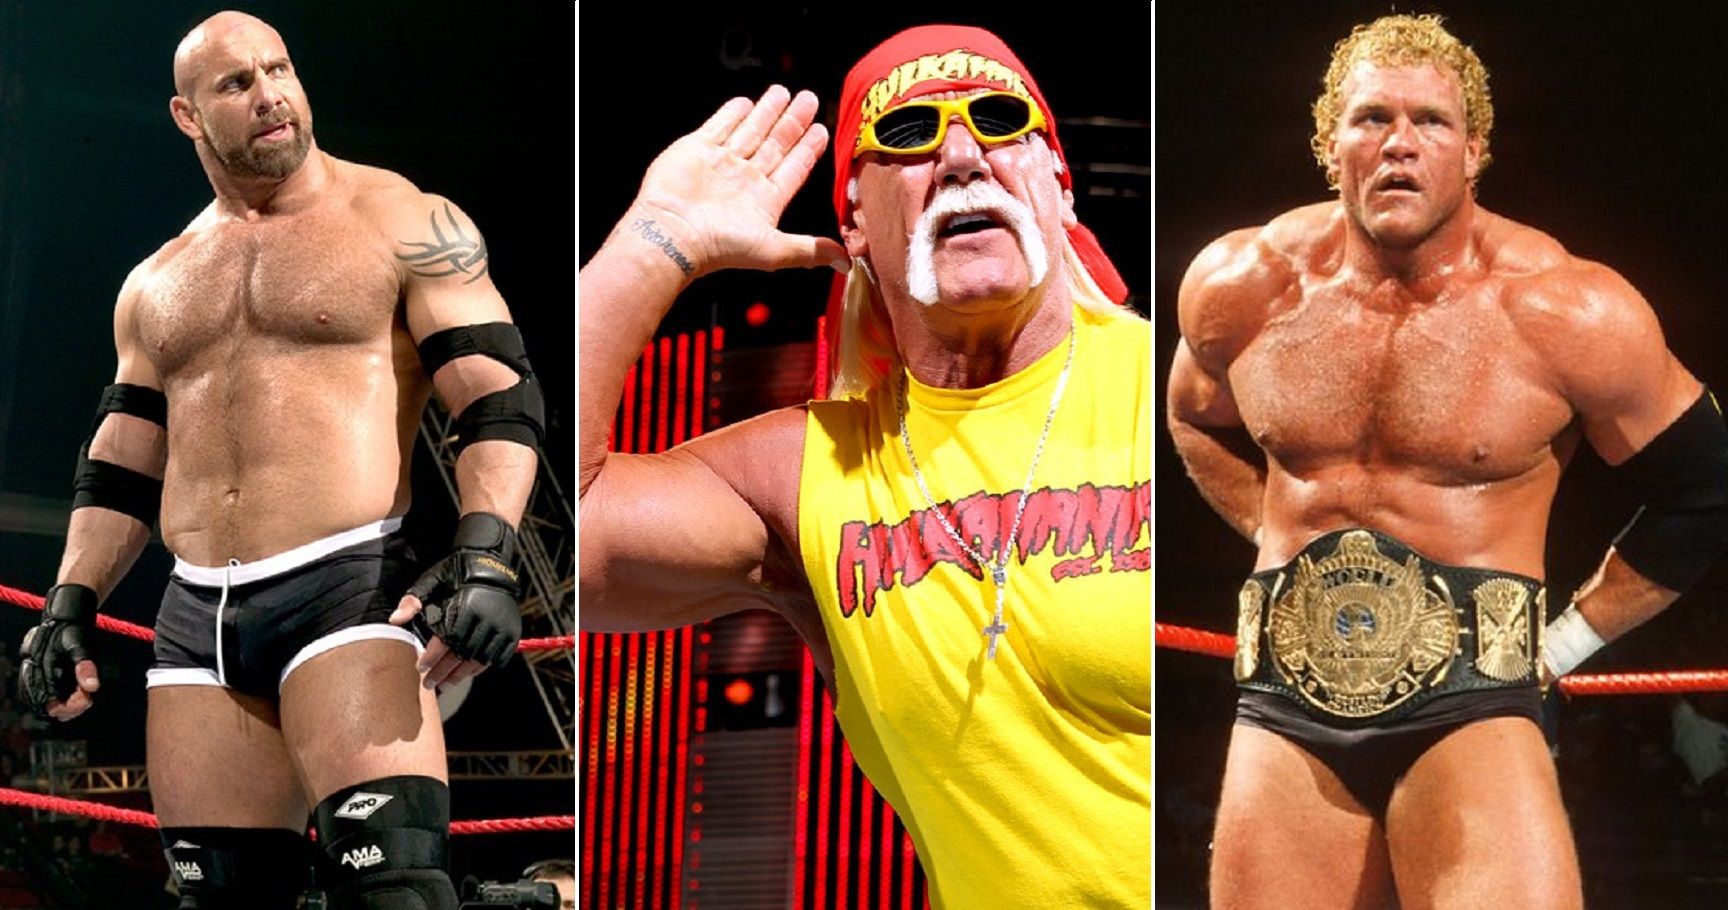 Top 15 Most One-Dimensional Wrestlers